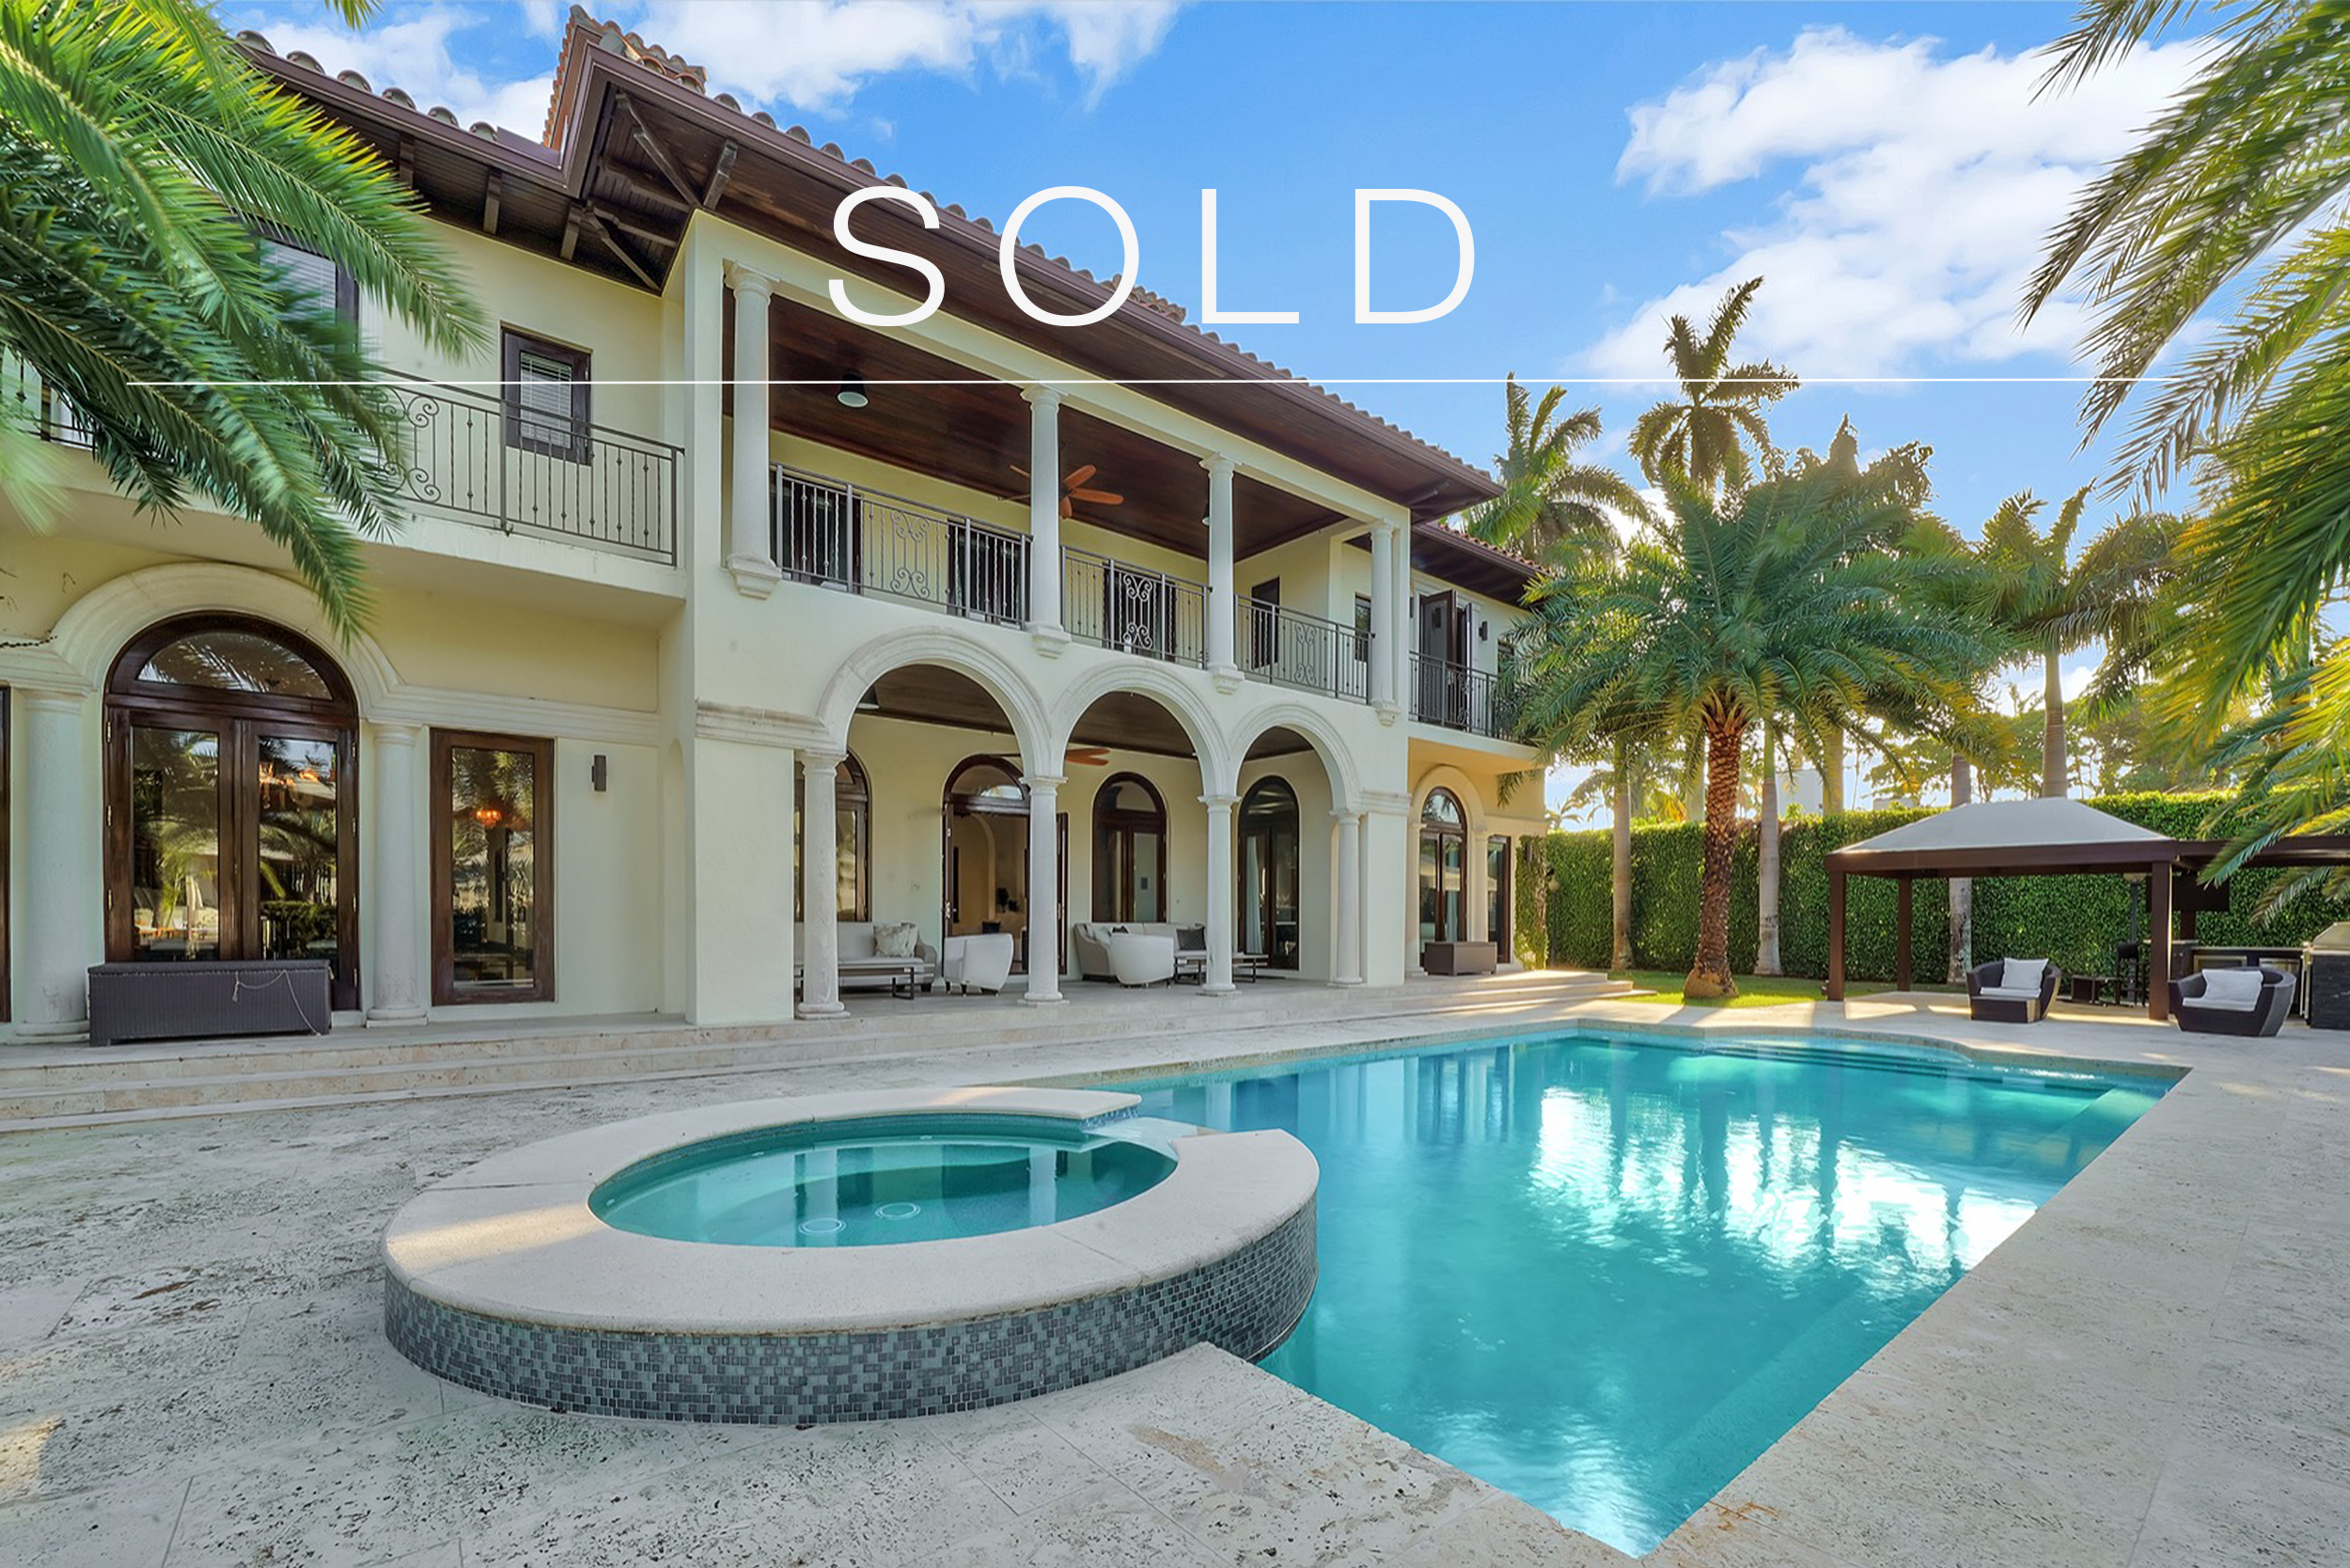 Sold estate on Sunset Islands for $20,400,000 by Miami top luxury broker, Nelson Gonzalez.